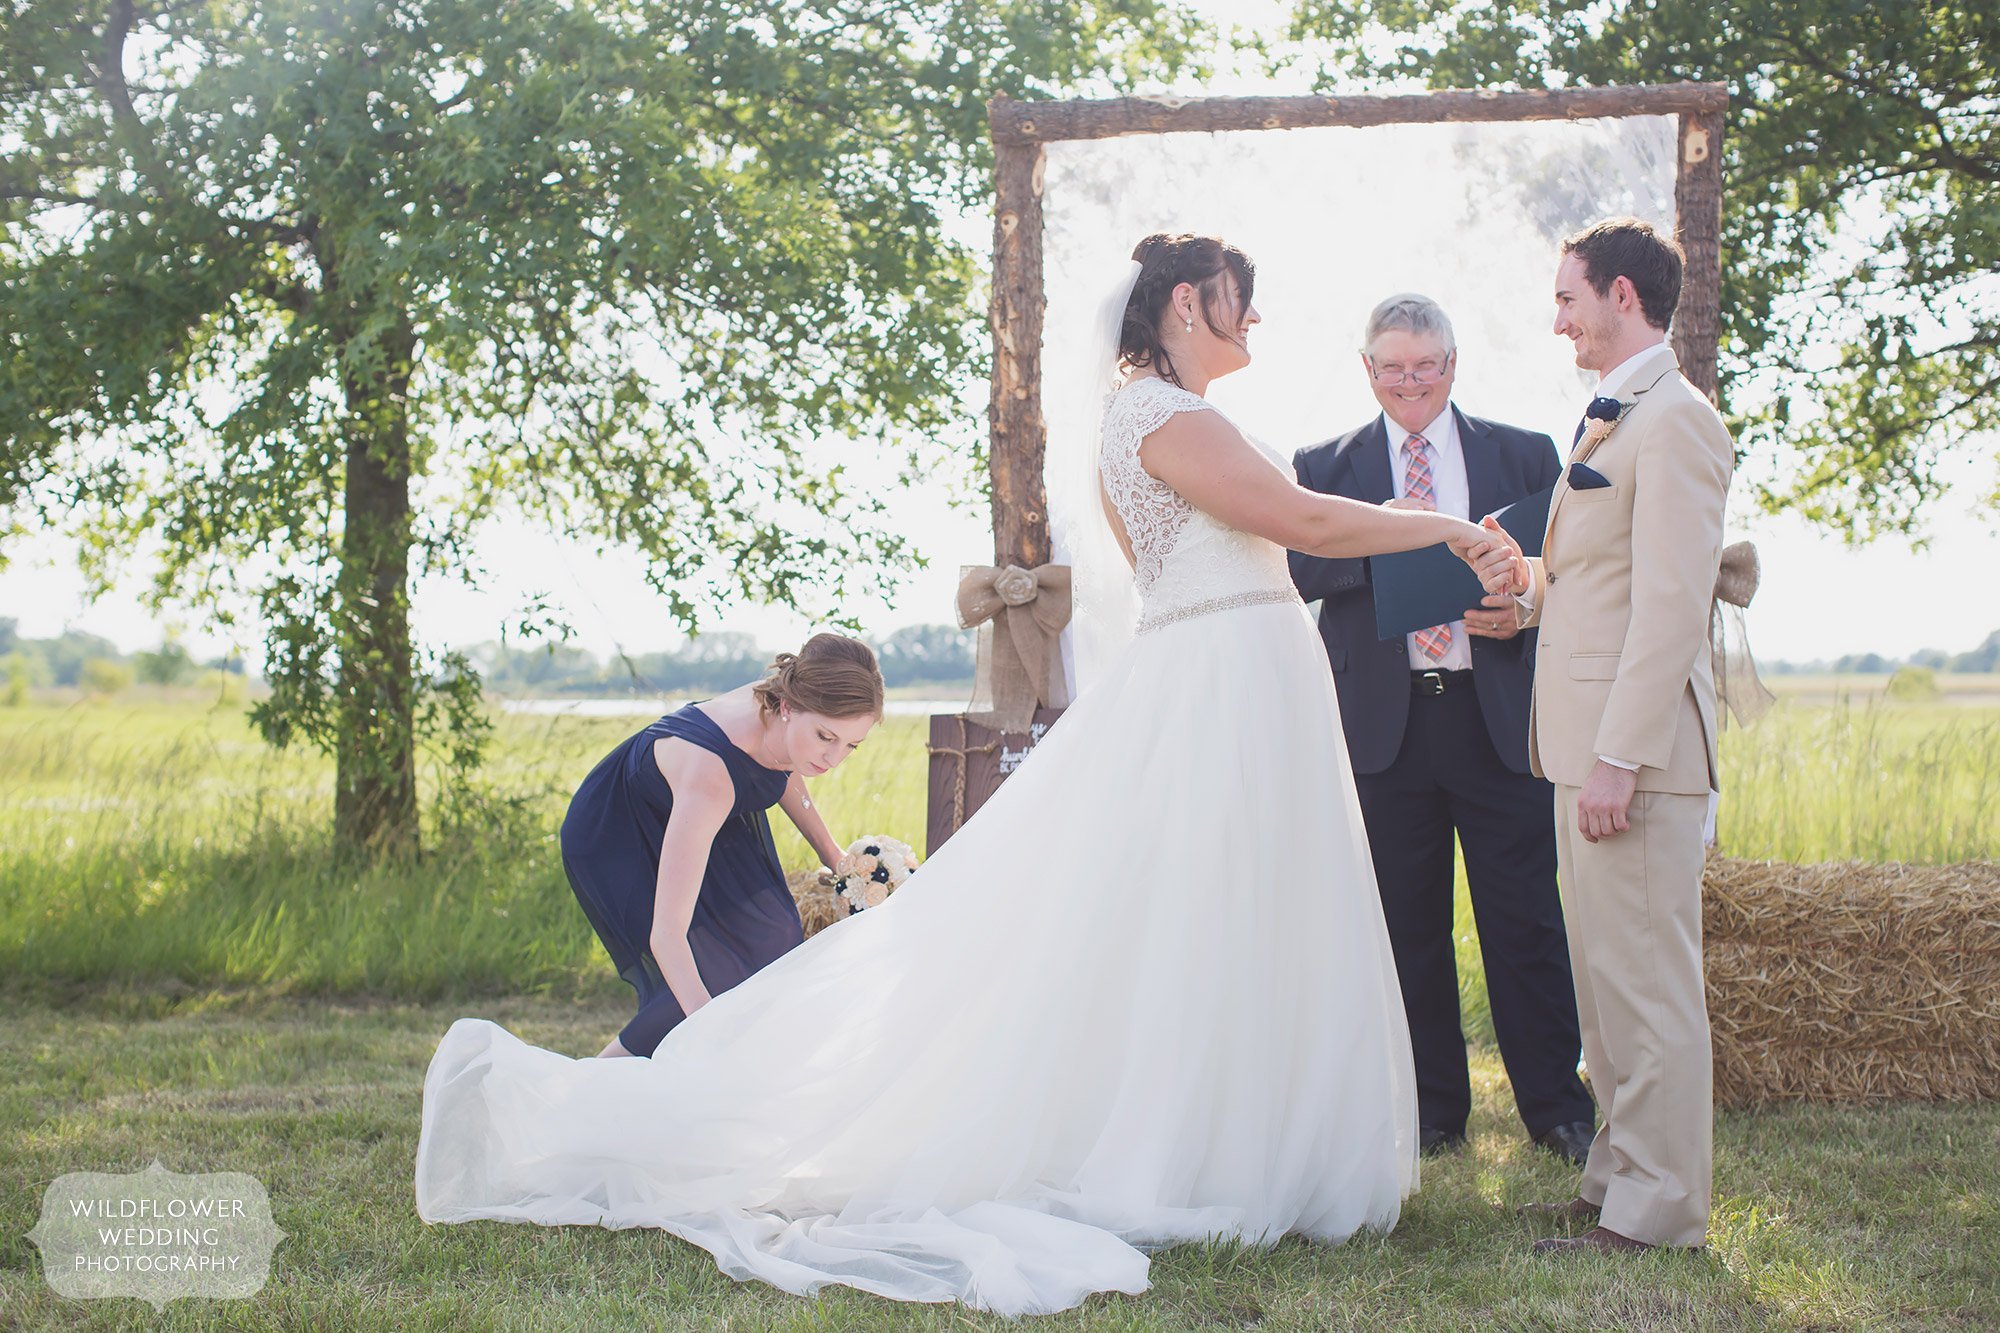 Natural country wedding ceremony in a field with a rustic wood arbor and lace in Columbia, MO.